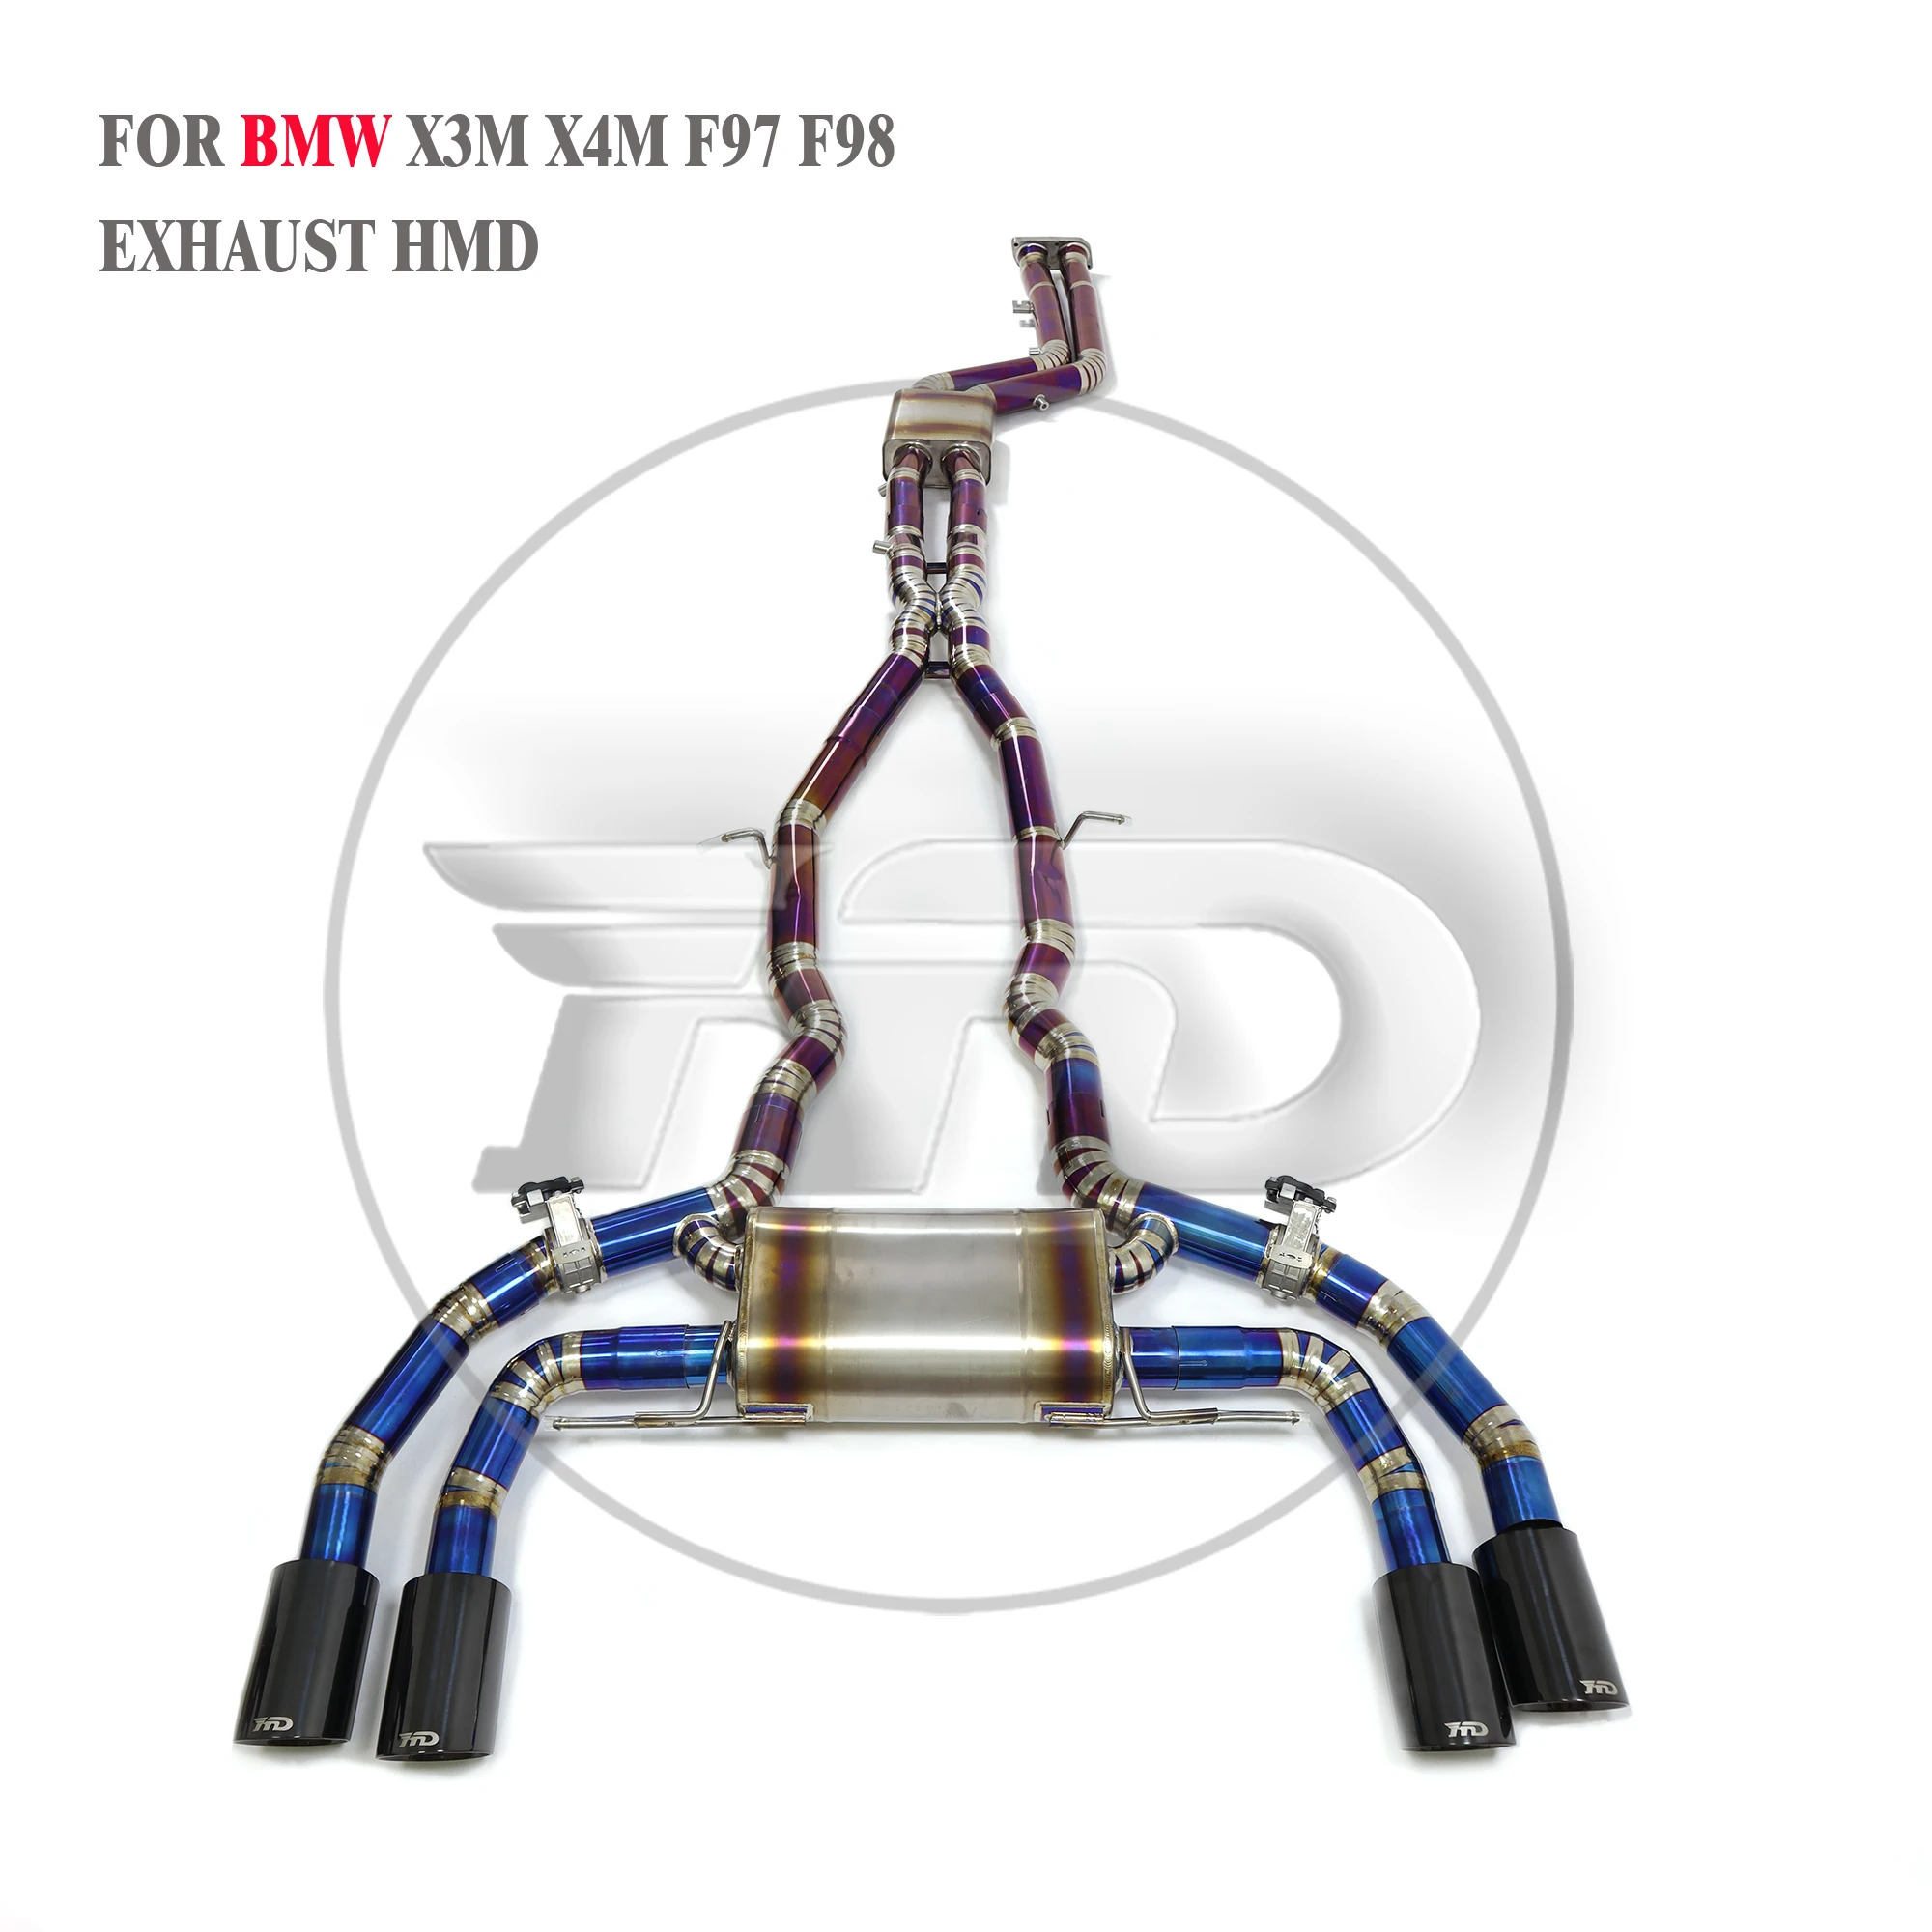 

HMD Titanium Alloy Exhaust System Performance Valve Catback is Suitable For BMW X3M X4M Muffler For Cars